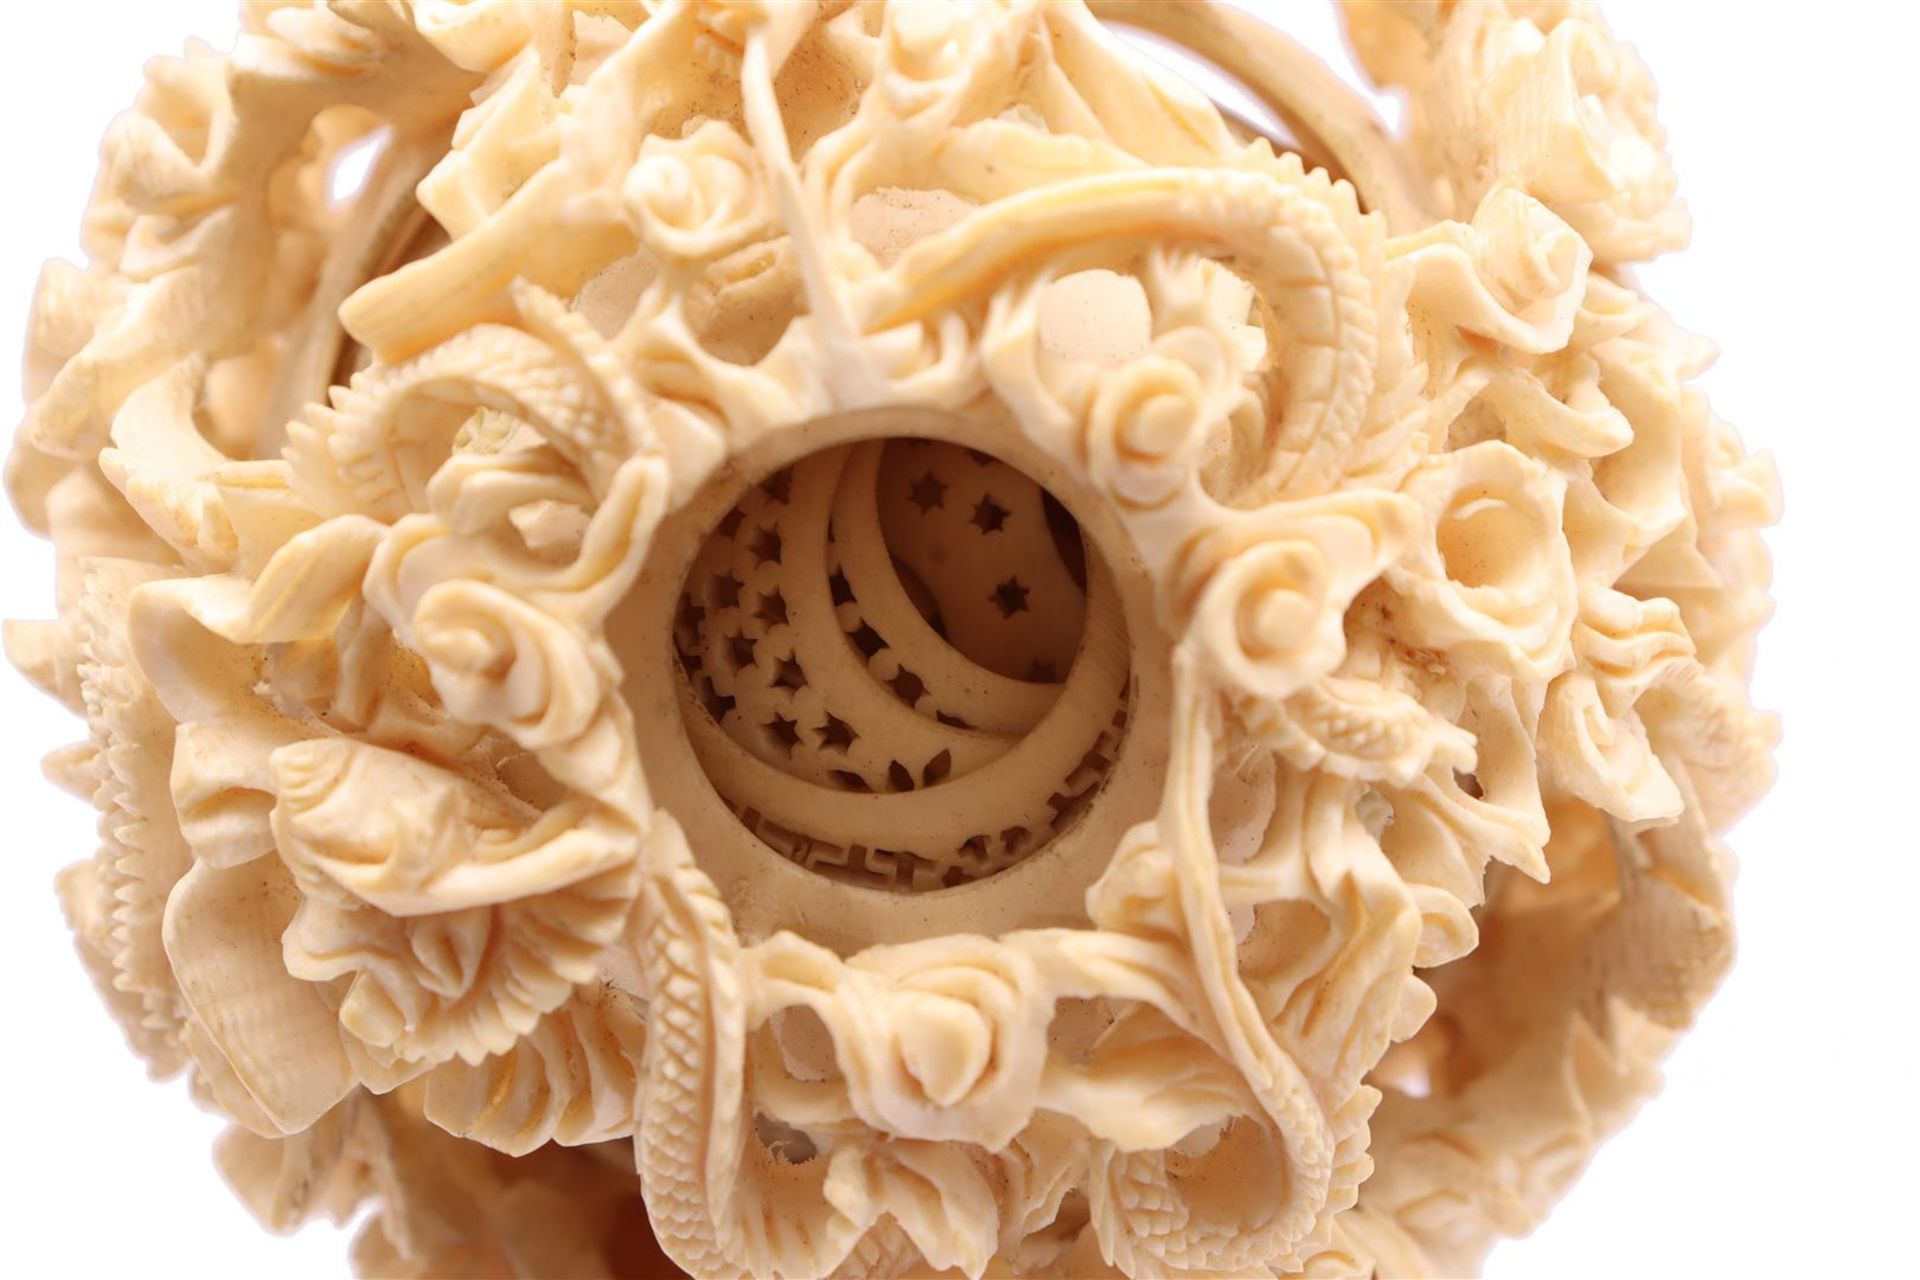 Richly carved ivory ball - Image 8 of 9